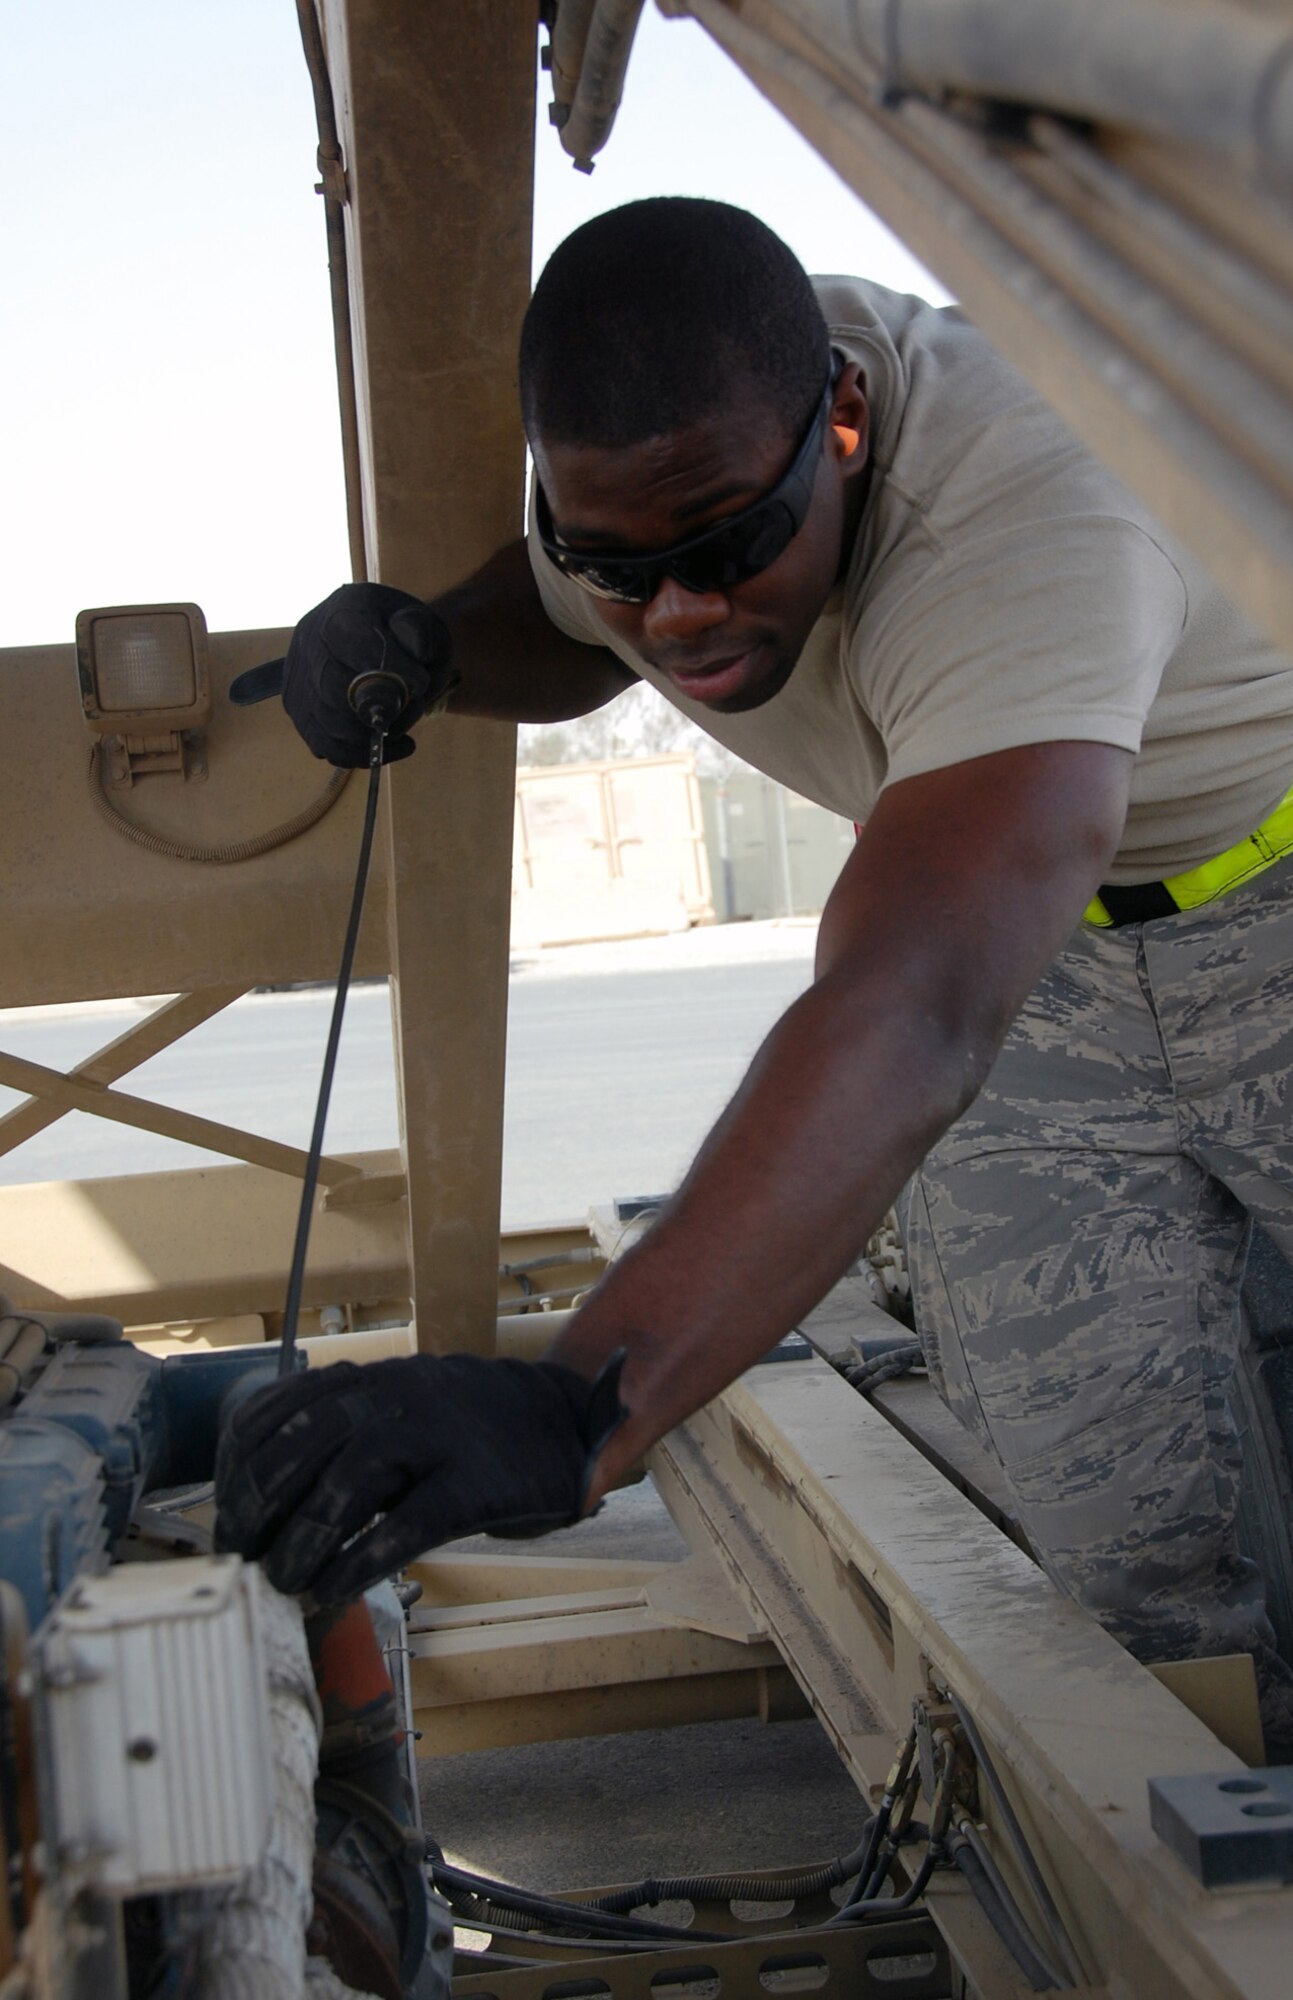 Senior Airman William Jacobs, 386th Expeditionary Logistics Readiness Squadron Aerial Port, inspects a loader April 27 in Southwest Asia. Airman Jacobs is a reservist assigned to the 71st Aerial Port Squadron, Langley Air Force Base, Va. The 71st APS is a geographically separated unit of the 512th Airlift Wing located at Dover Air Force Base, Del. (U.S. Air Force photo/Tech. Sgt. Lindsey Maurice)